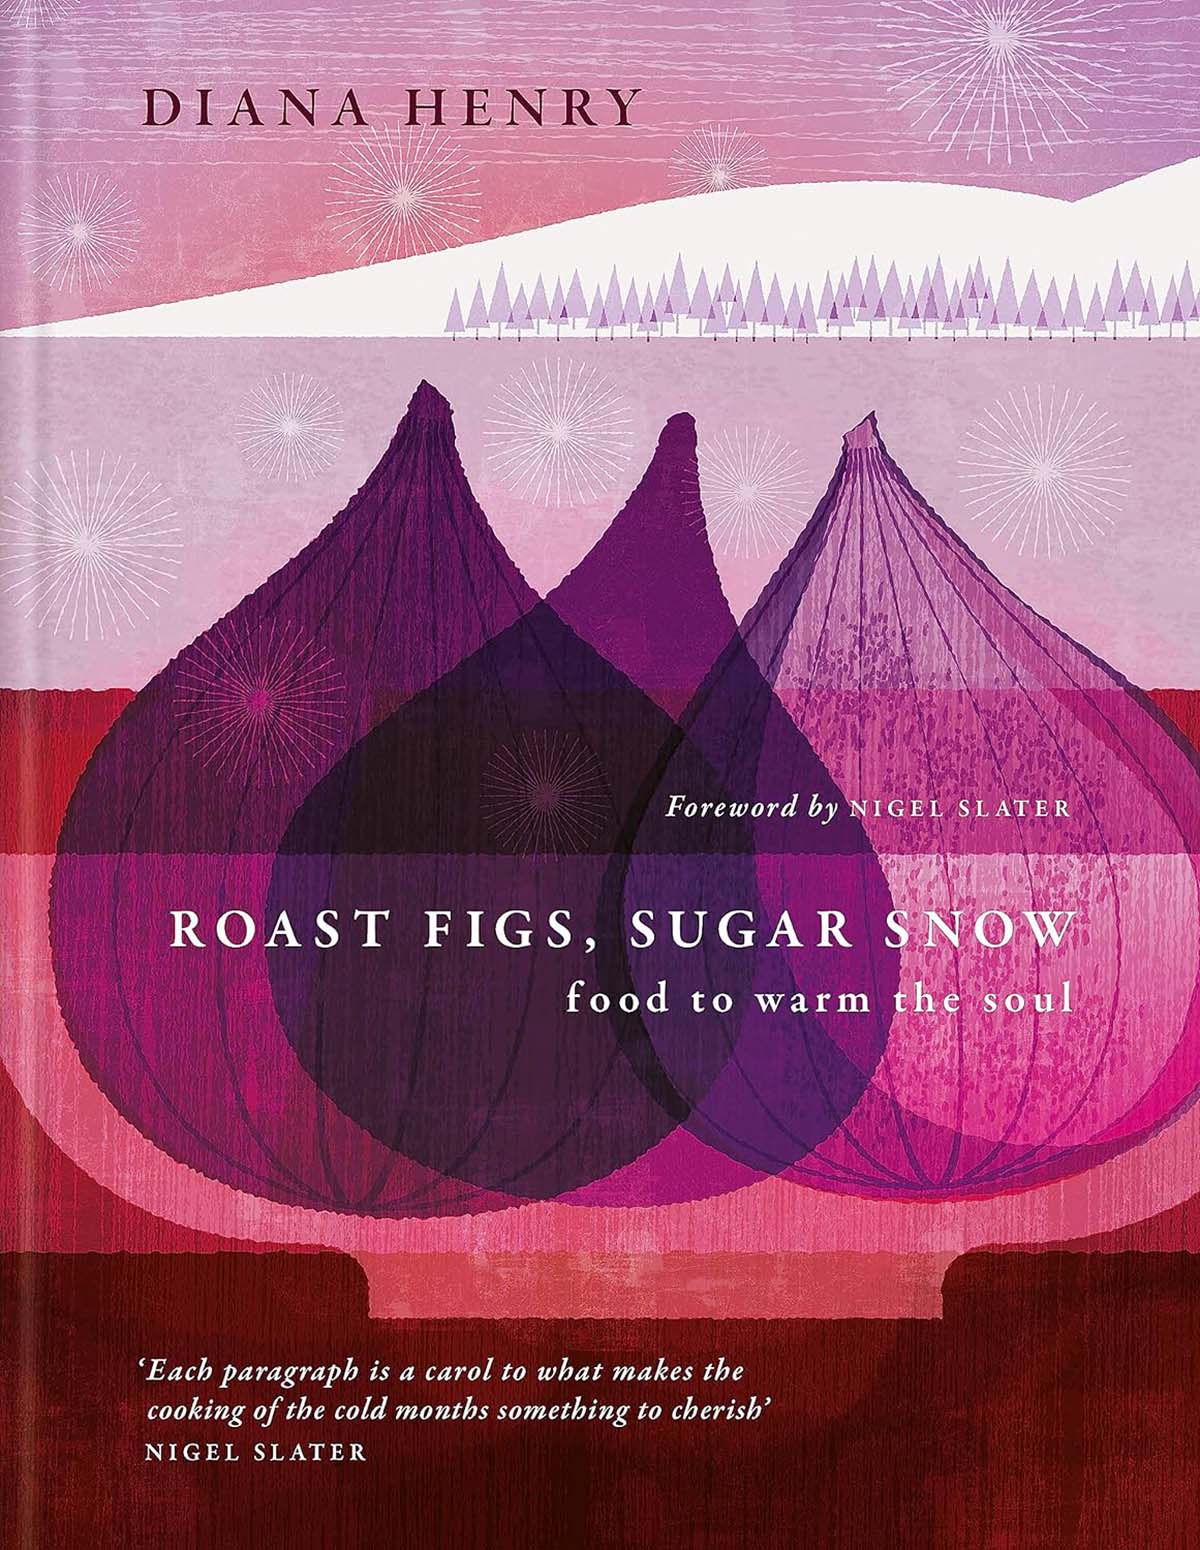 The cover of Roast Figs, Sugar Snow by Diana Henry